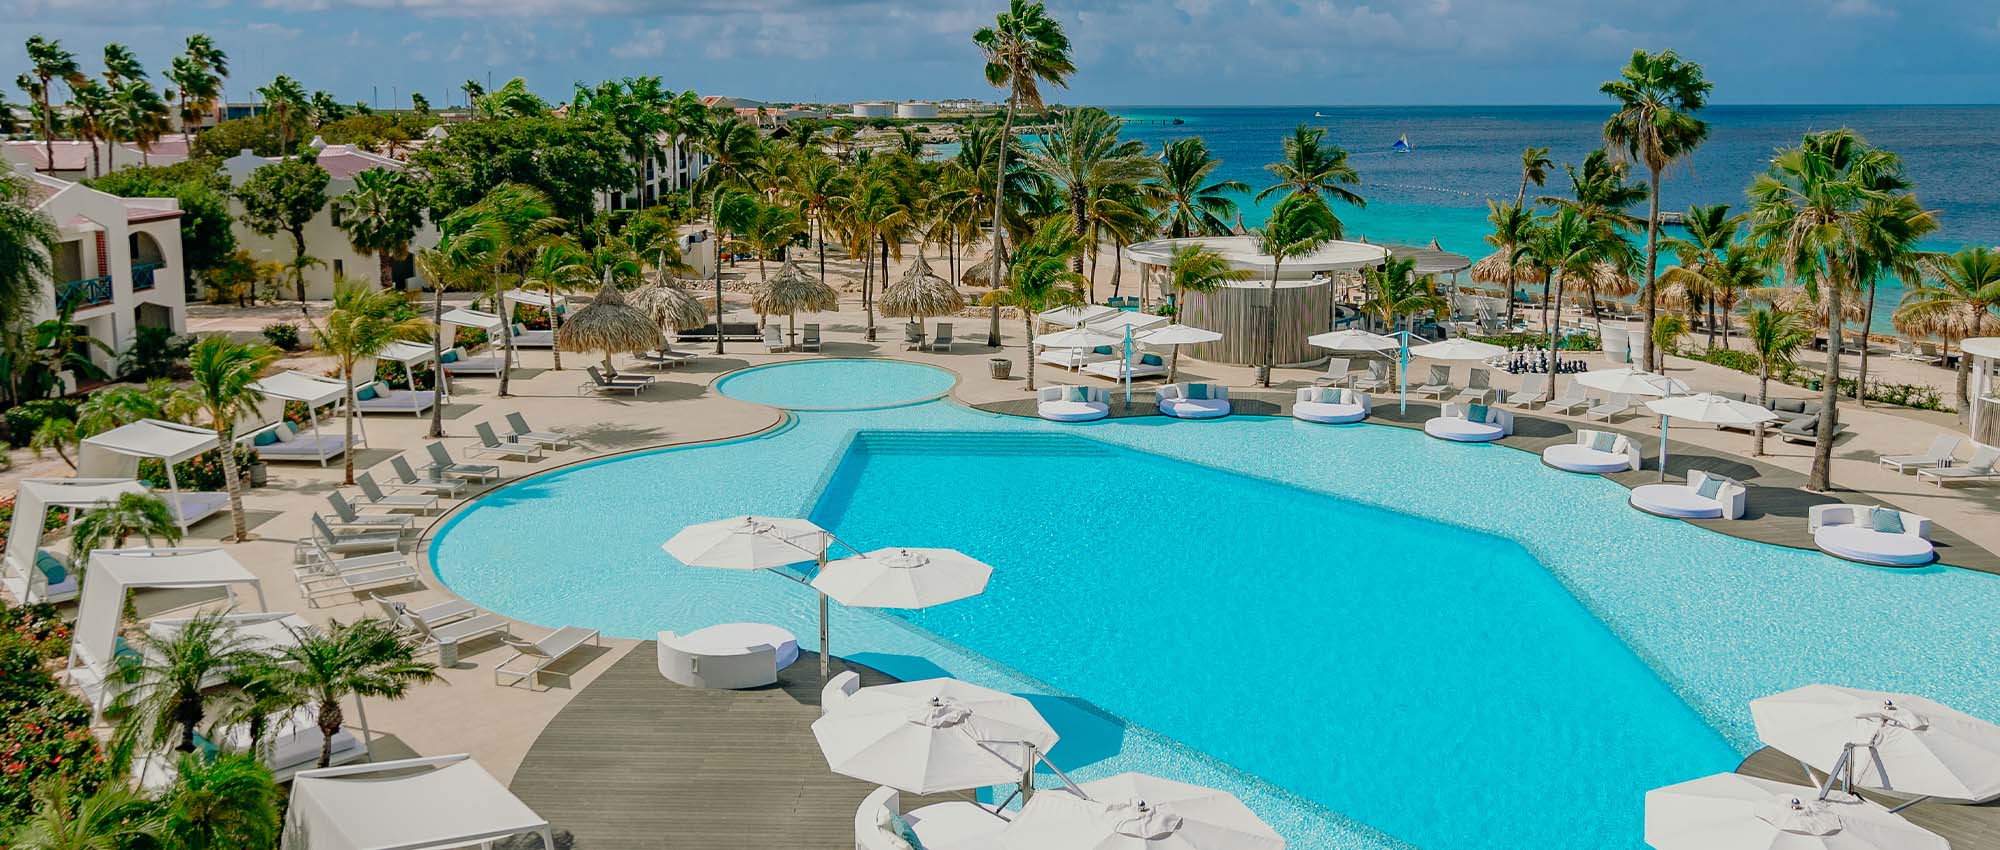 Aerial view of outdoor pool area overlooking the ocean surrounded by palm trees and cabanas